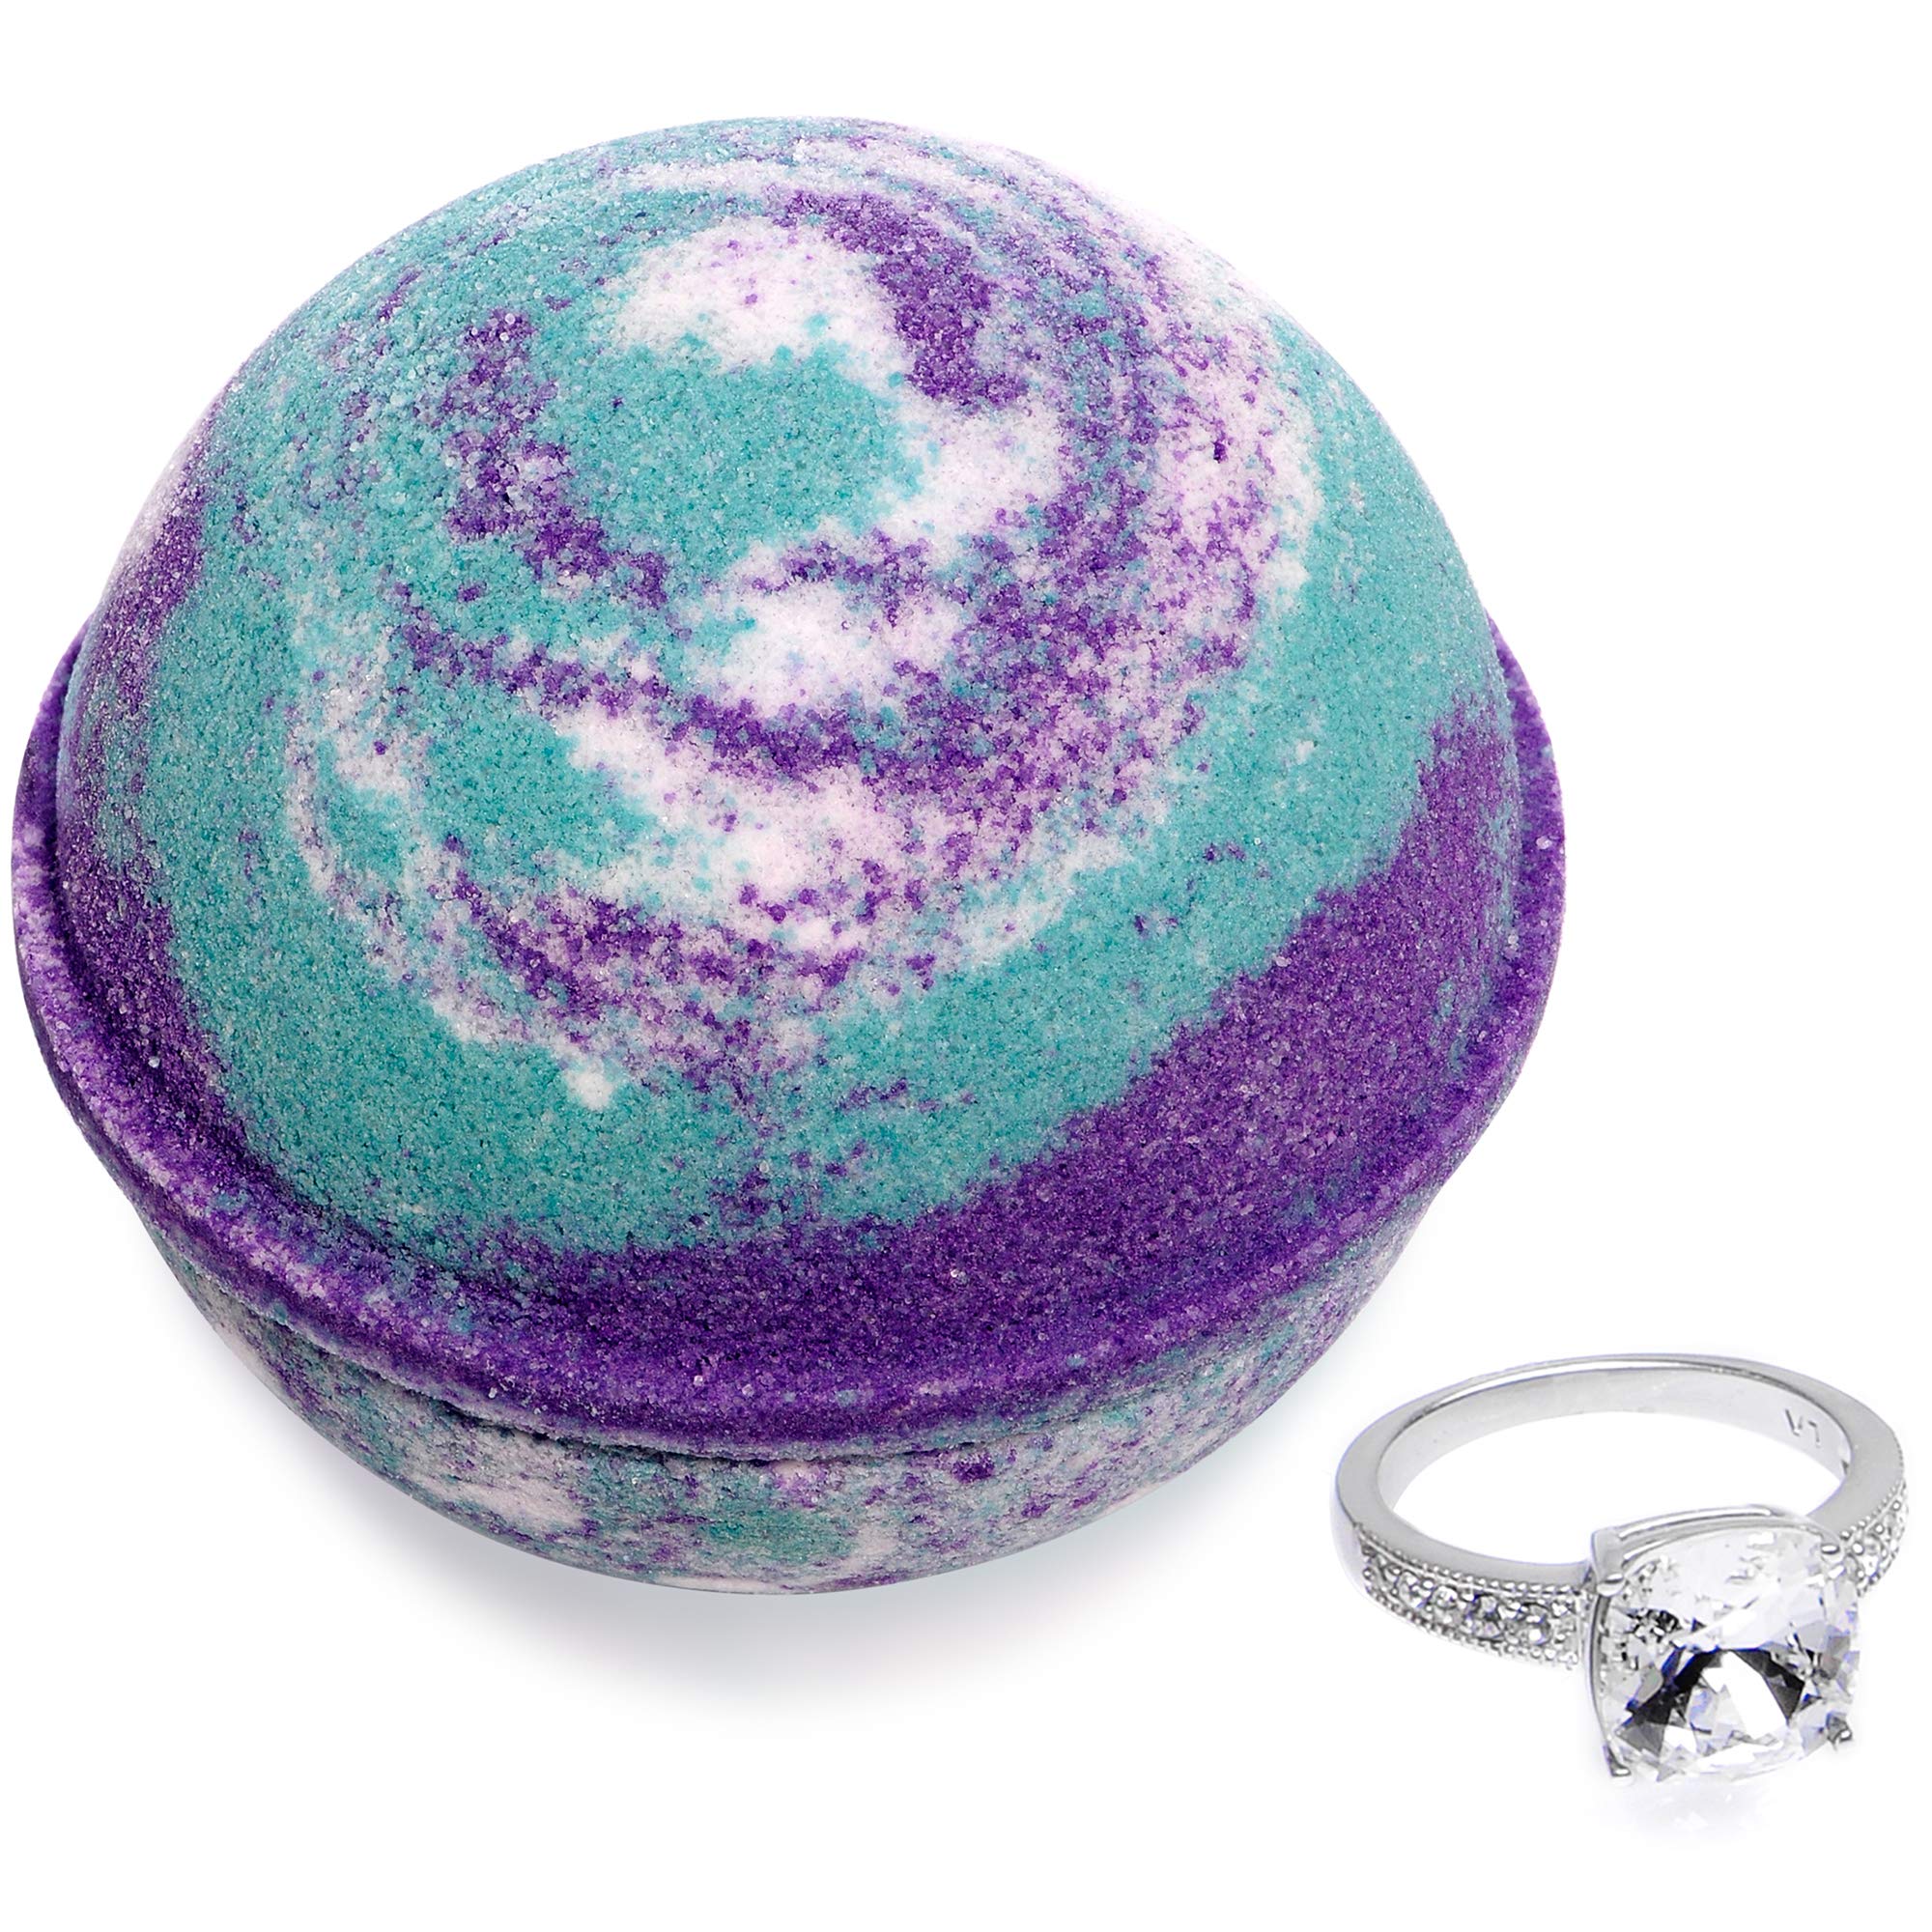 Bath Bomb with Ring Inside Mermaid Daydream Extra Large 10 oz. Made in USA (Surprise)